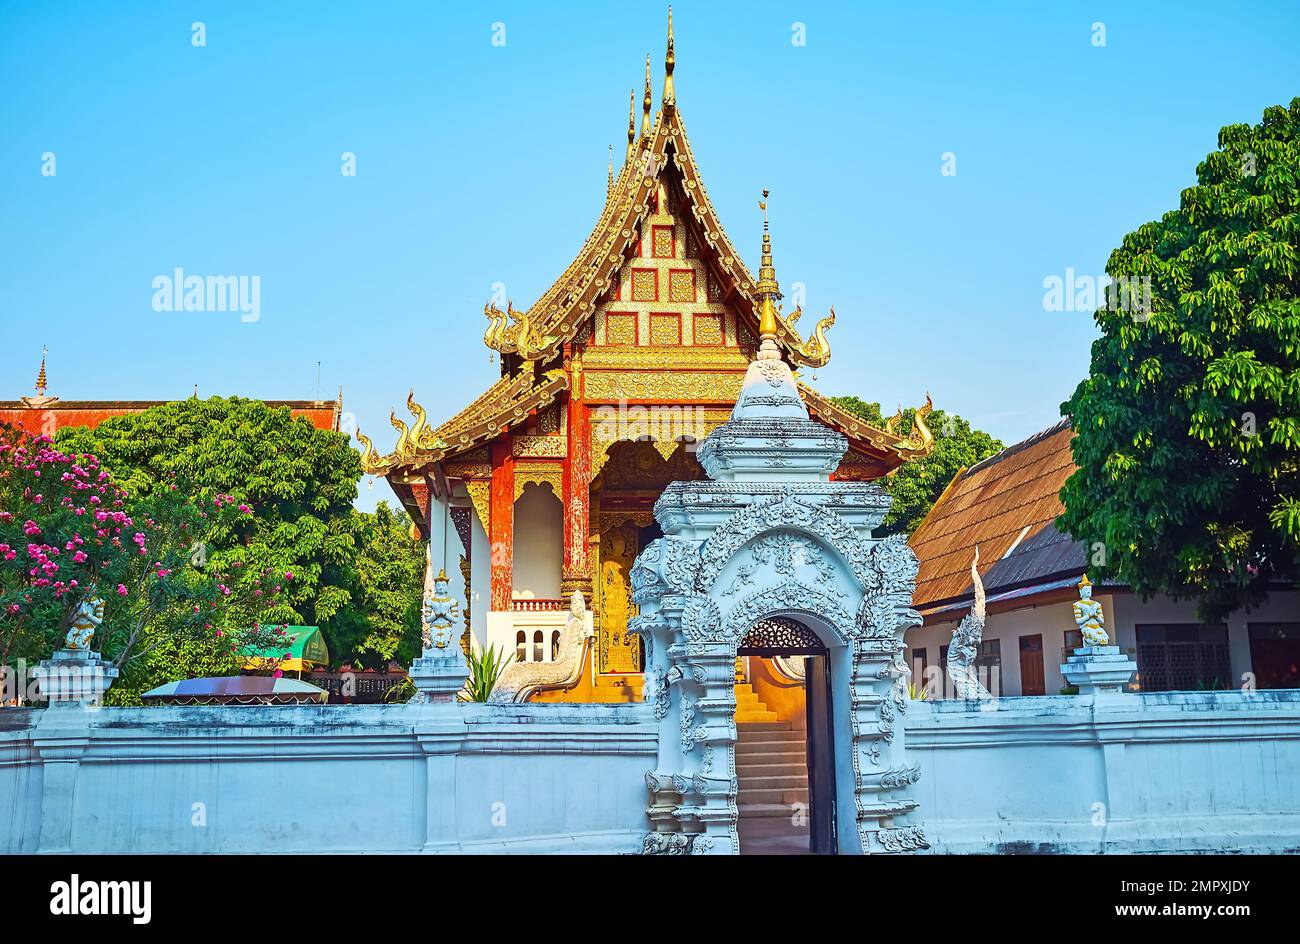 The carved white gate of Wat Chang Taem temple, decorated with reliefs, golden hti umbrella, devata sculptures on the fence, Chiang Mai, Thailand Stock Photo